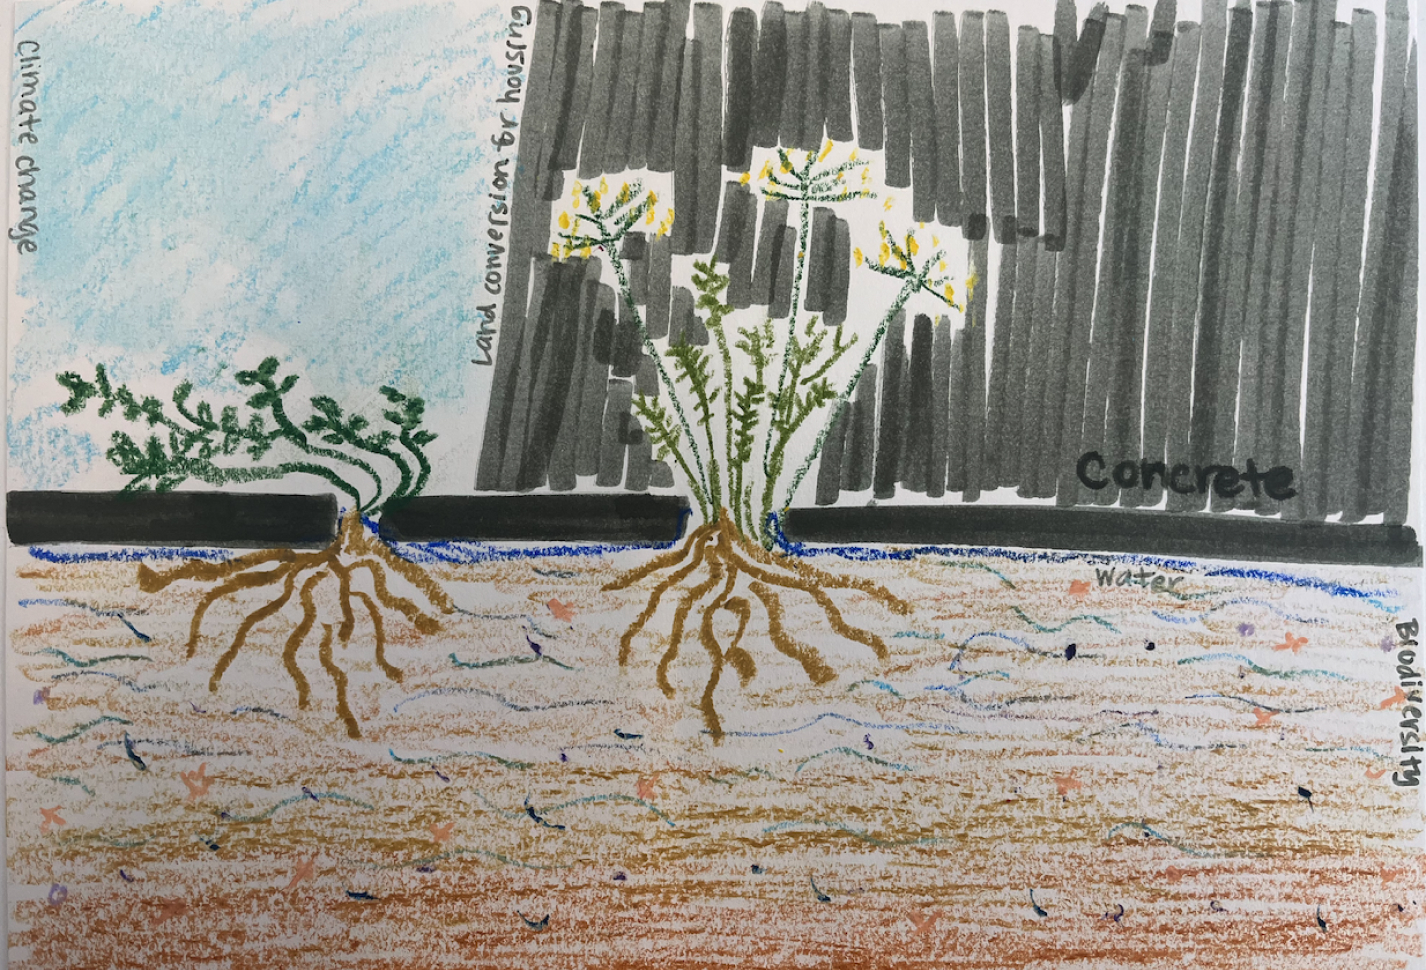 A drawing of Mint growing from the concrete, drawn by Sayoa Jodar during a workshop